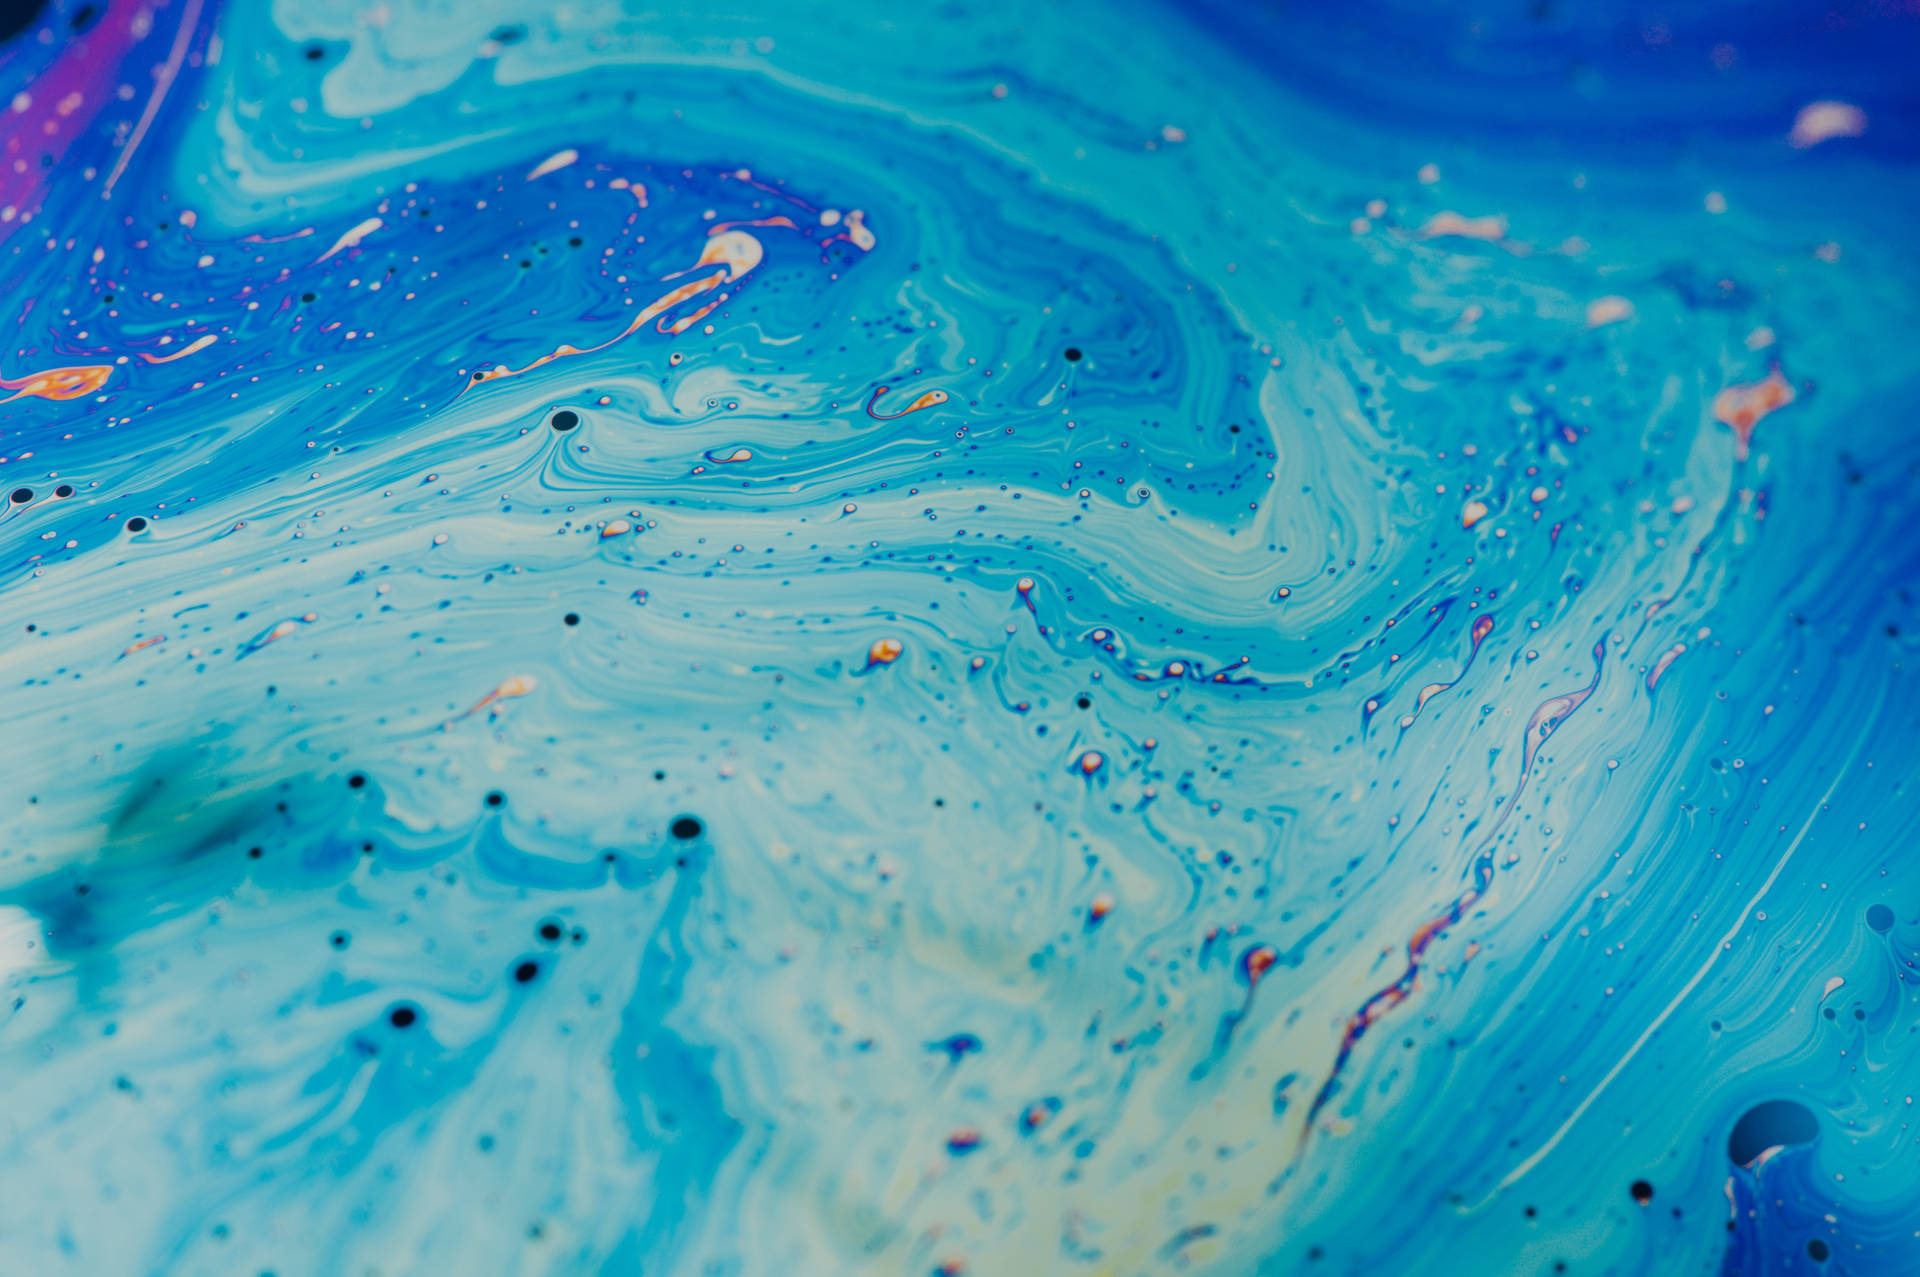 Blue Stains Abstract Art Wallpaper